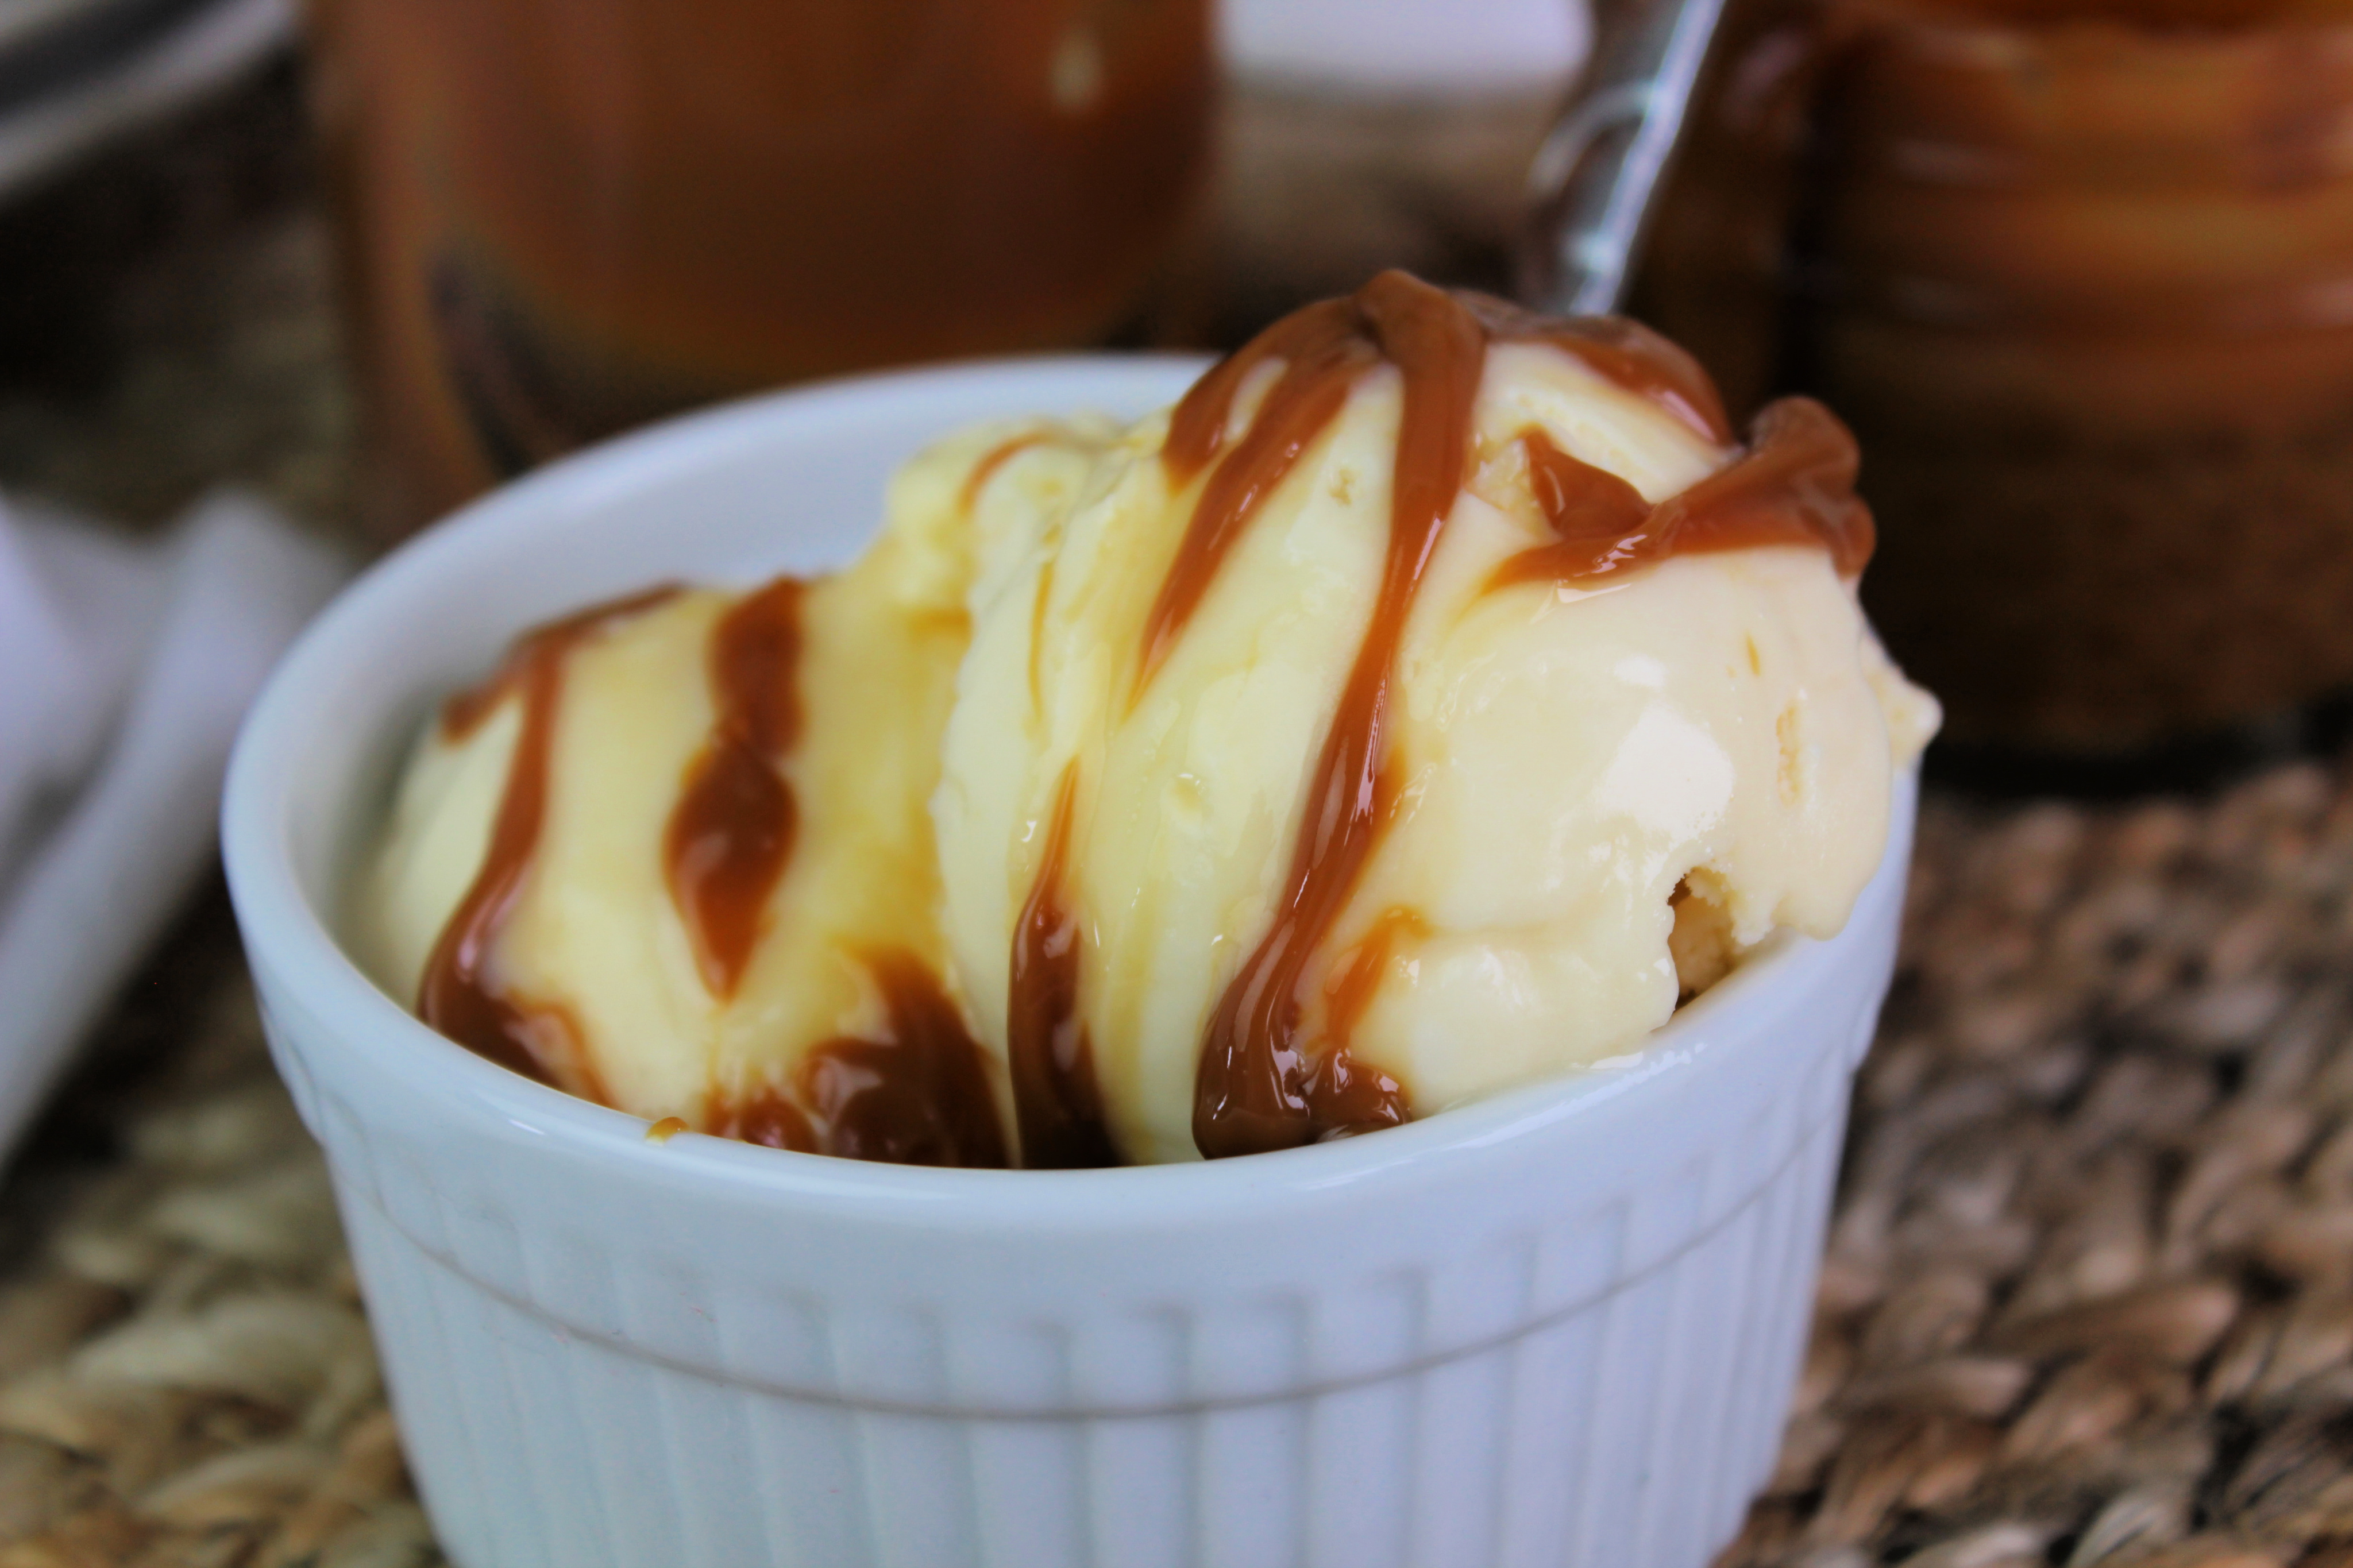 You seriously won't believe how easy it is to make this delicious dulce de leche style caramel! Just one ingredient + a crockpot is all you need. Perfect for recipes, ice cream, or as an apple dip!